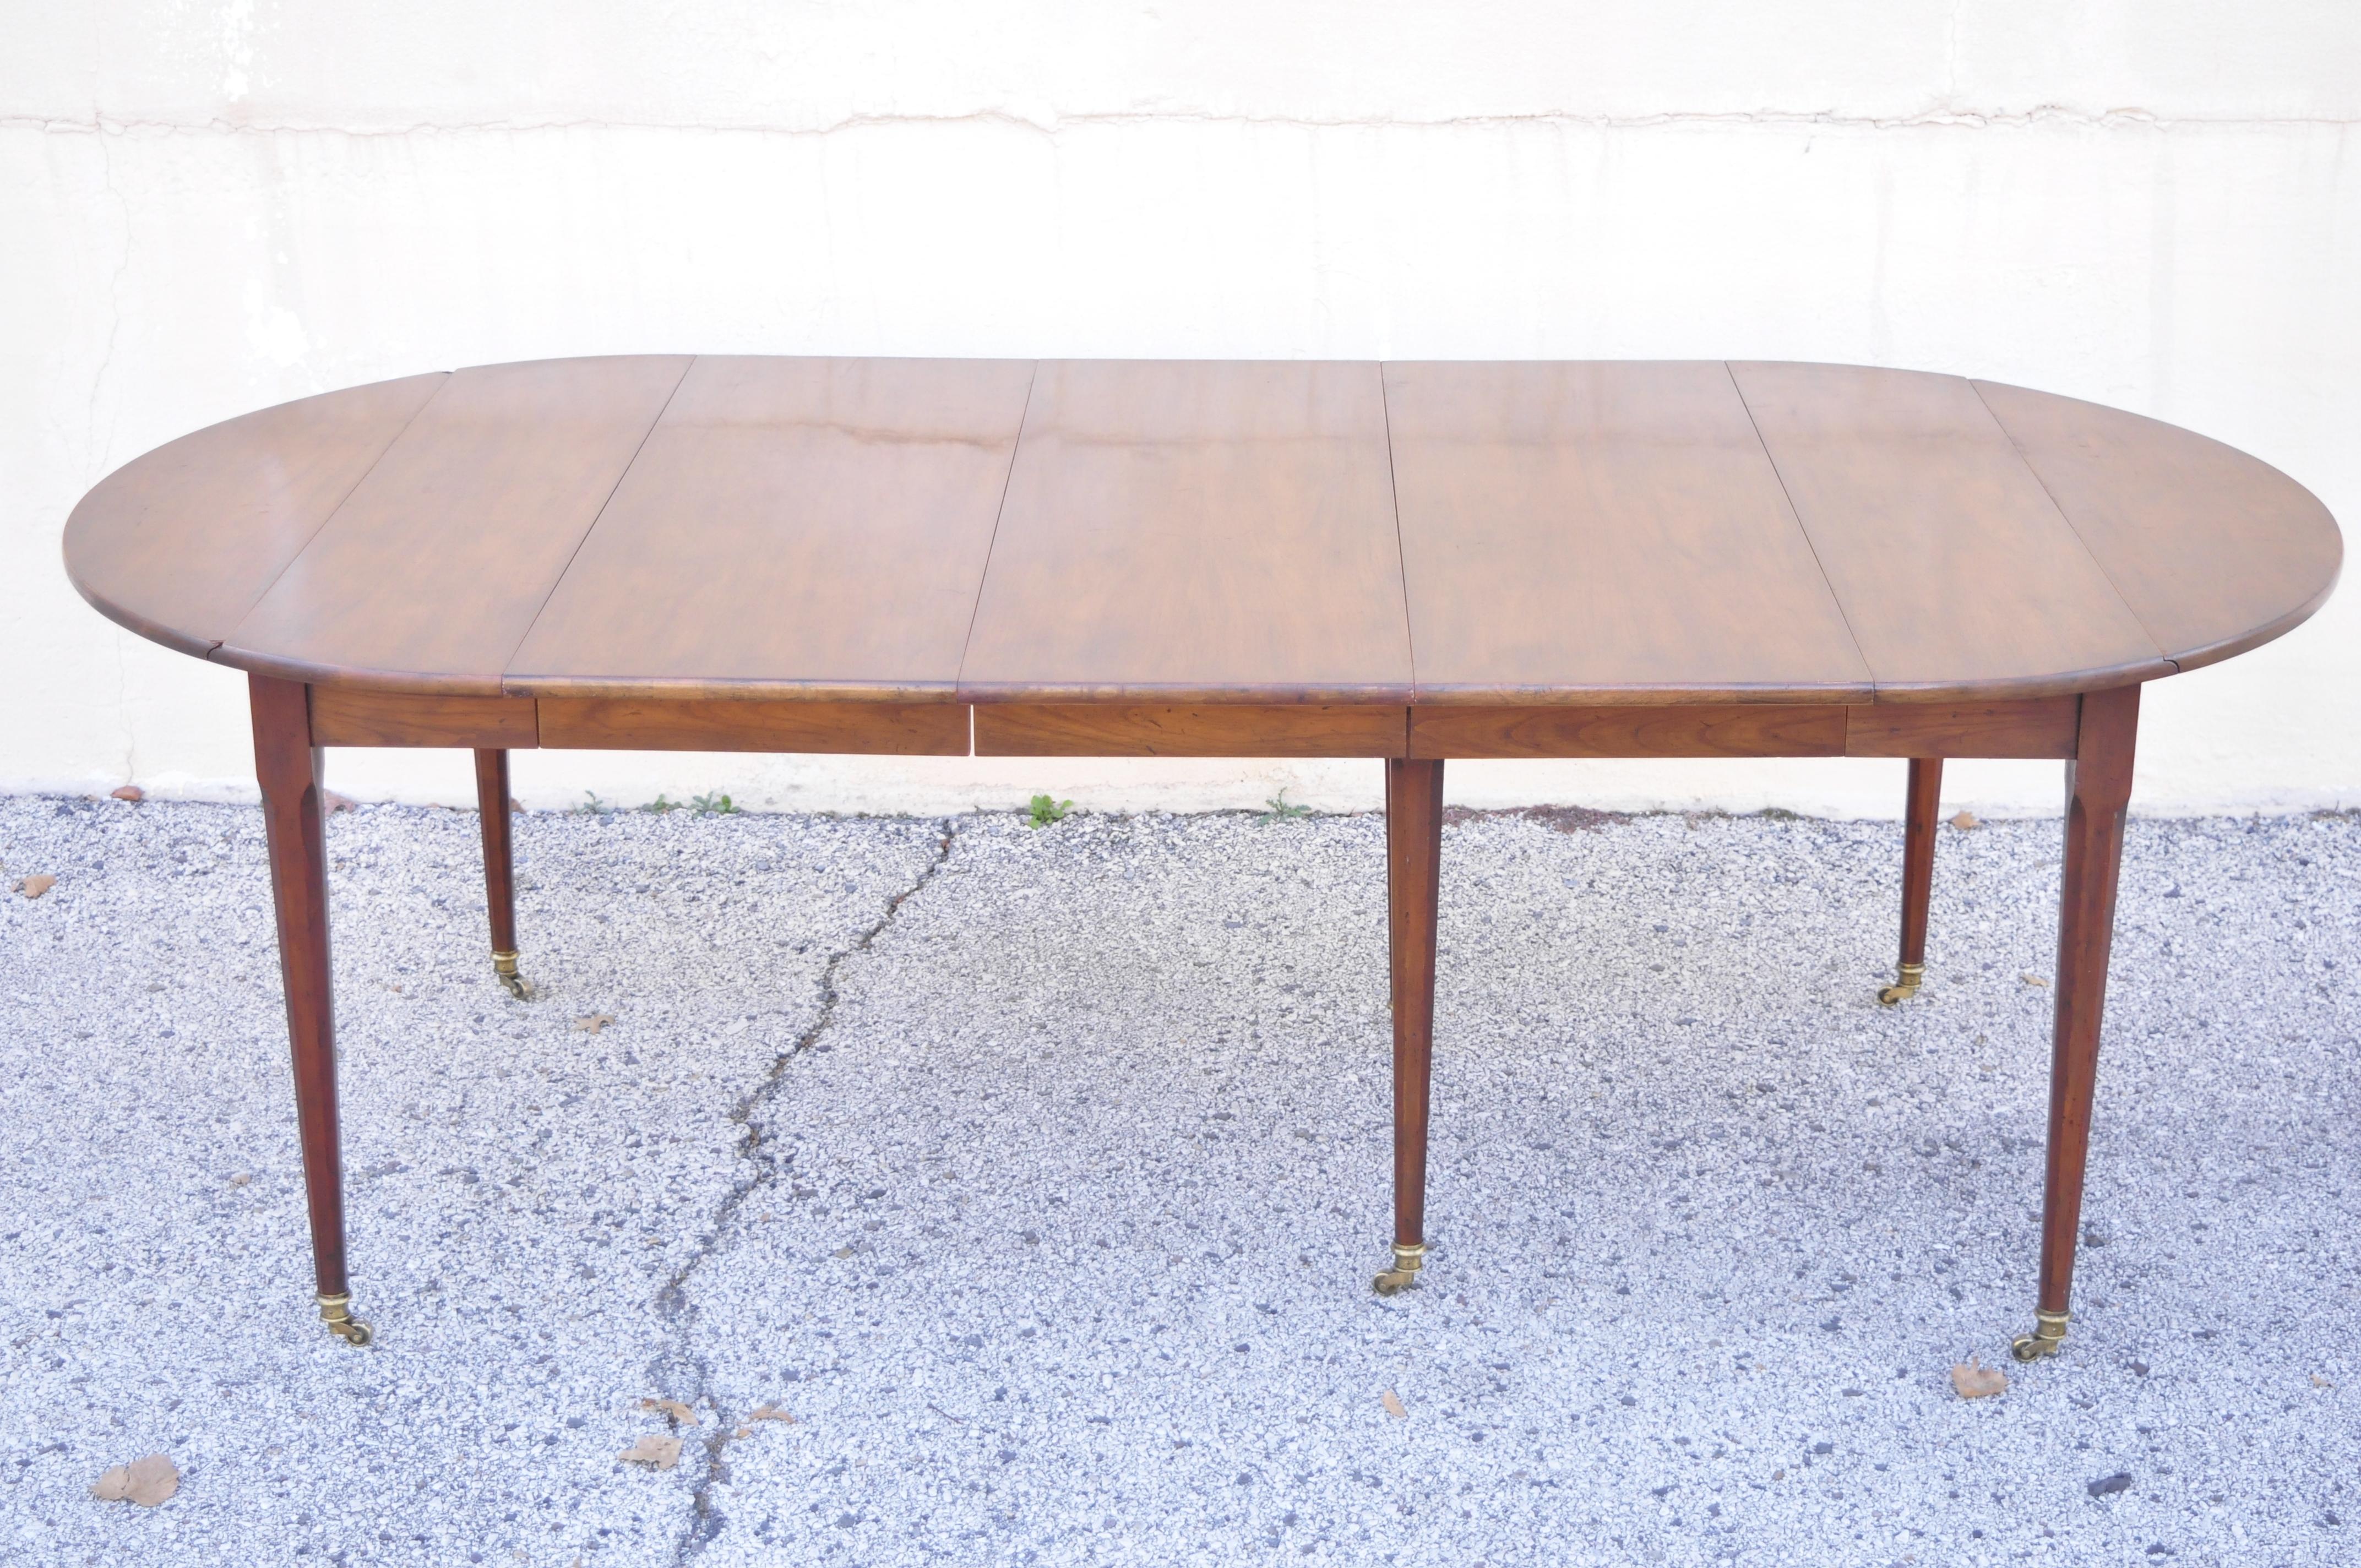 20th Century Baker Cherry Federal Extension Dropleaf Oval Dining Breakfast Table w/ 3 Leaves